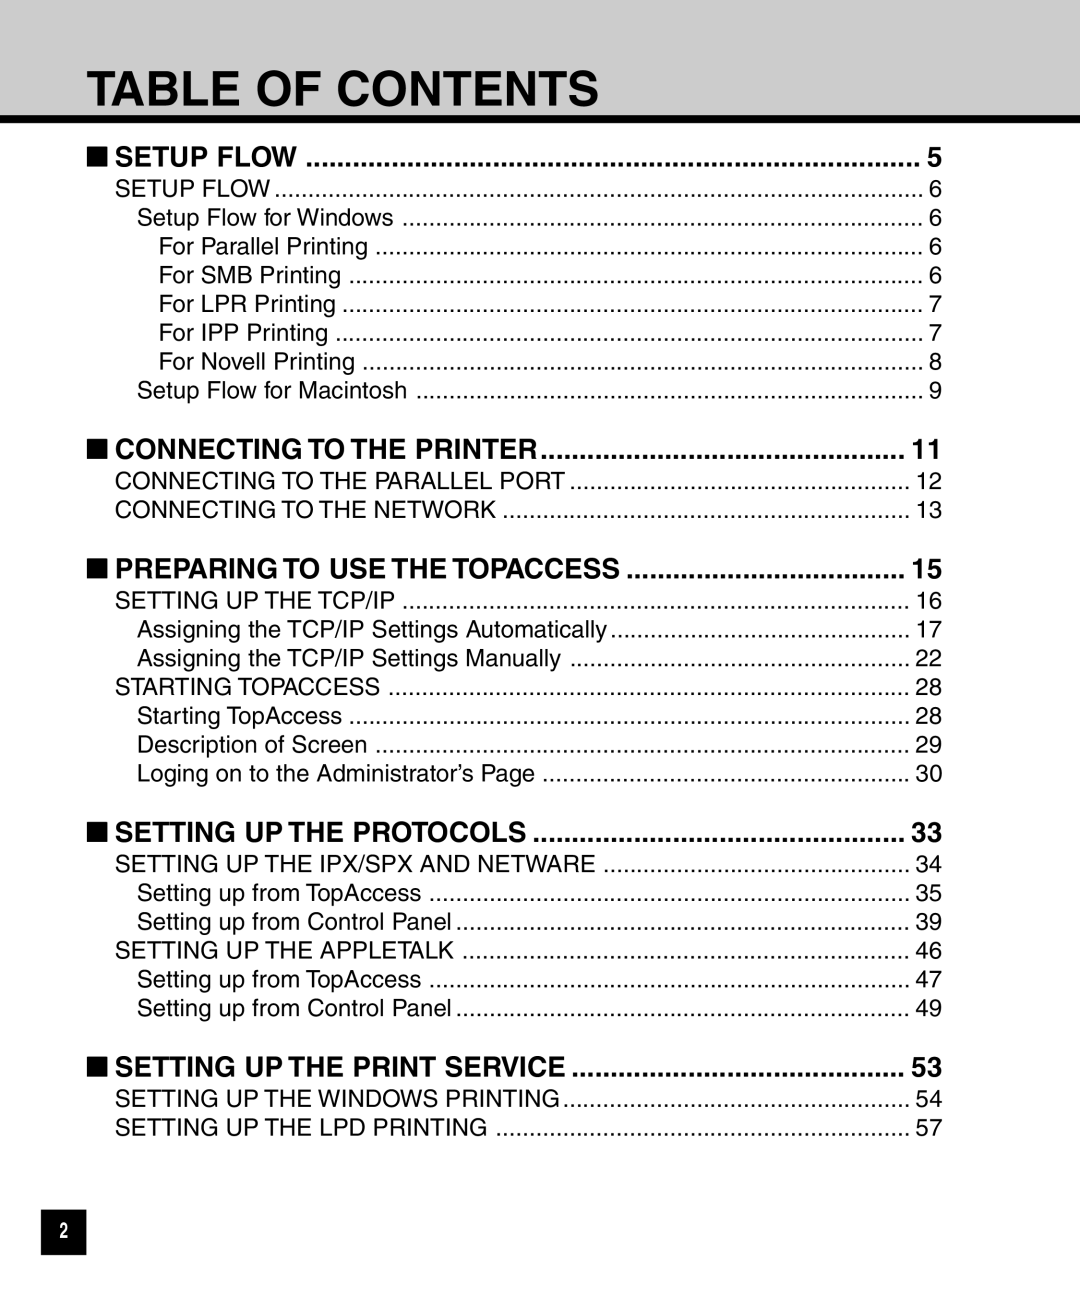 Toshiba GA-1040 manual Table Of Contents, Setup Flow, Connecting To The Printer, Setting Up The Protocols 